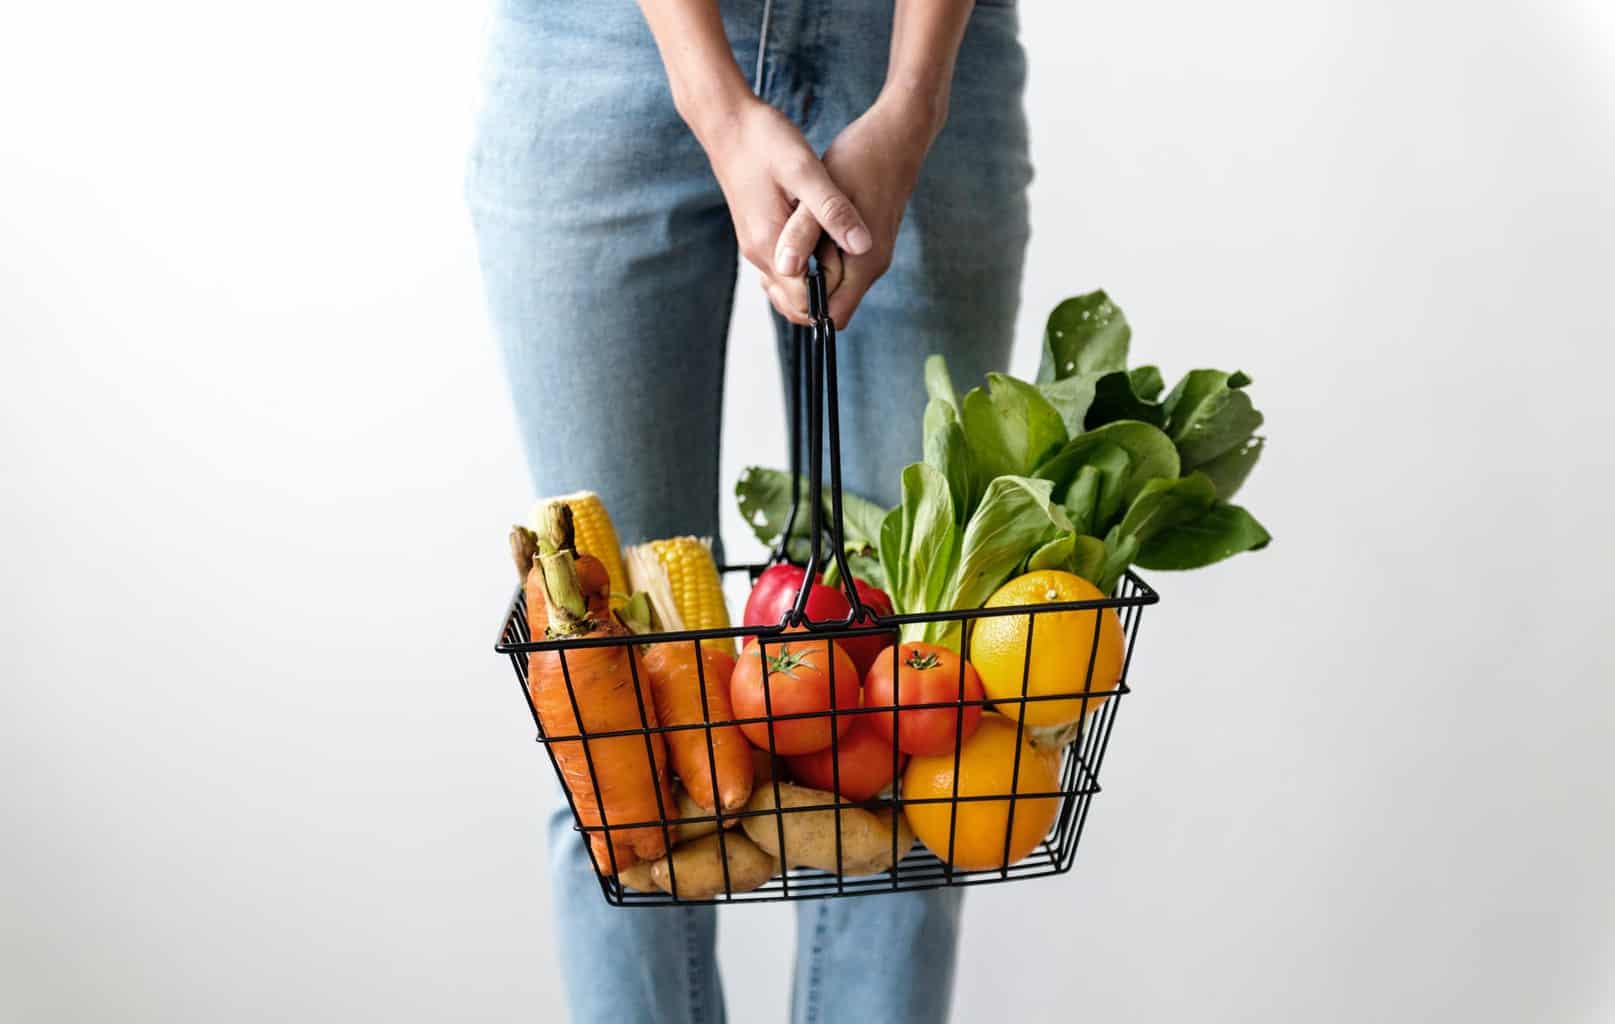 Woman holding shopping basket with food in it